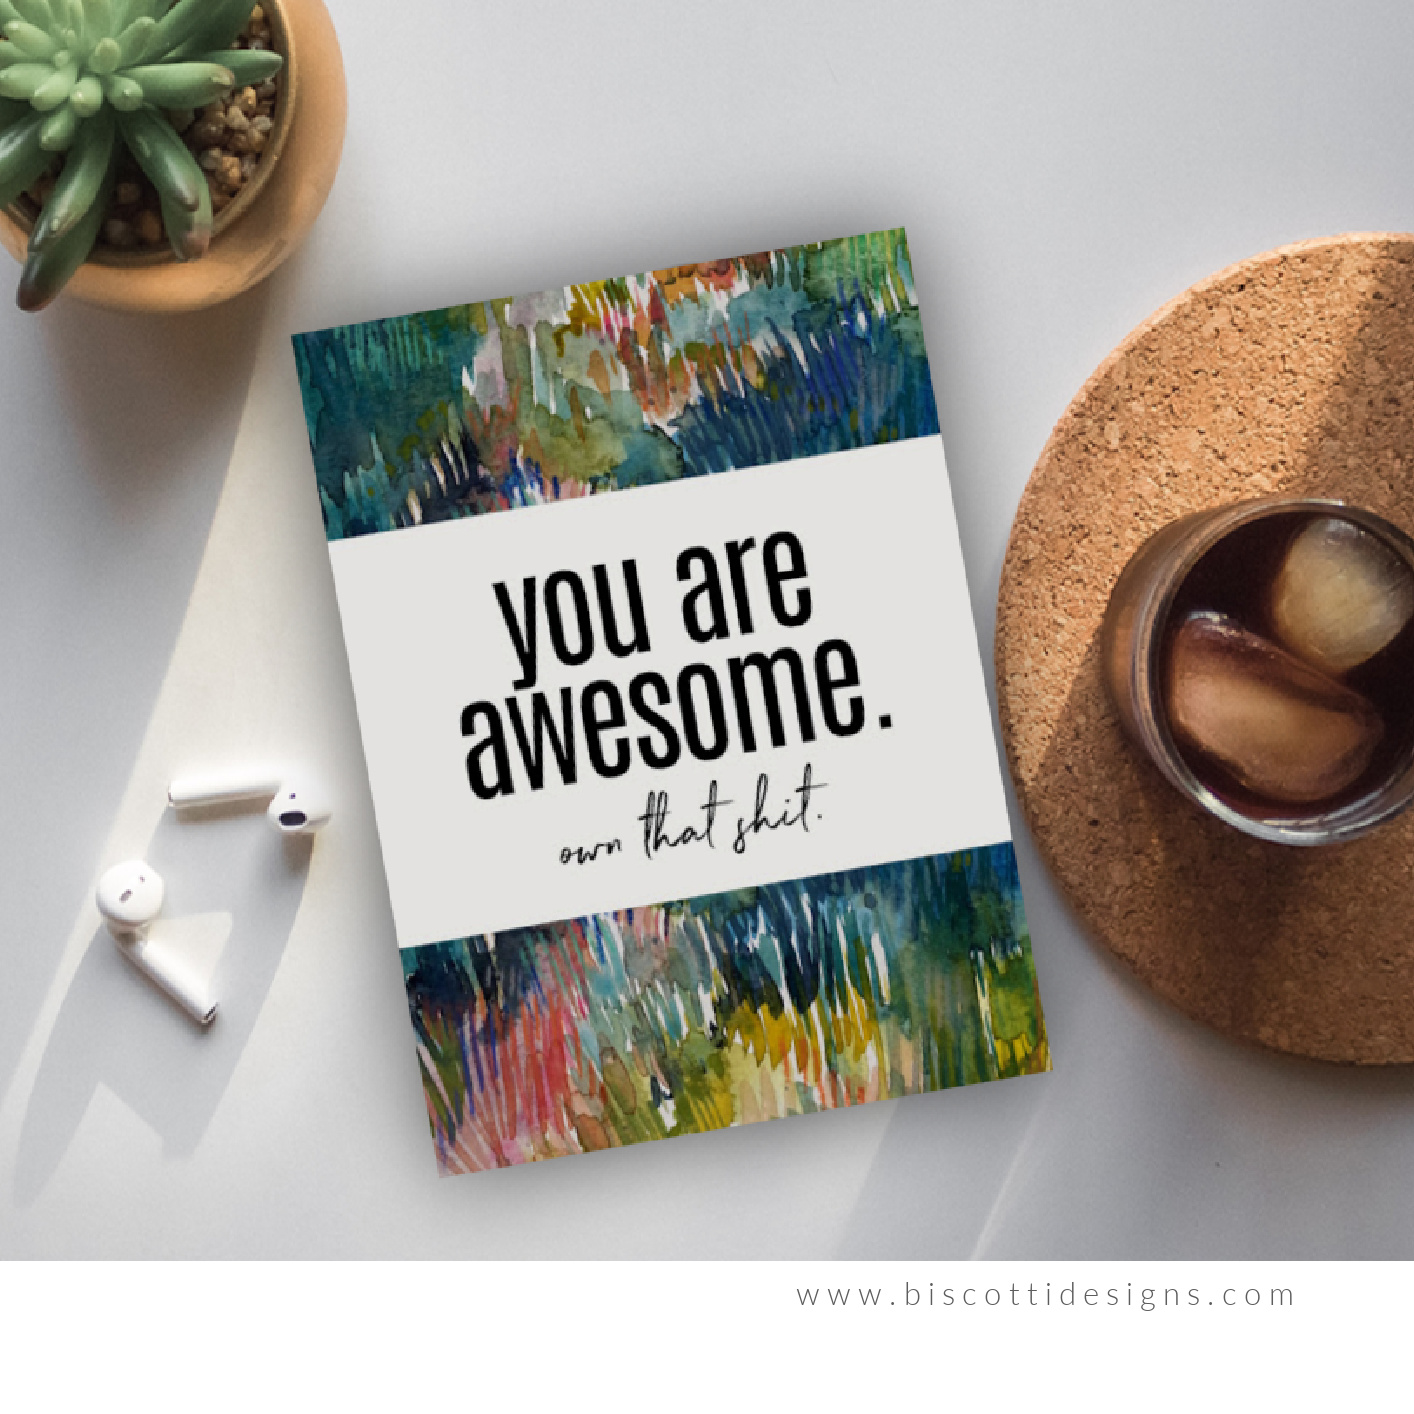 FB - _You are awesome_